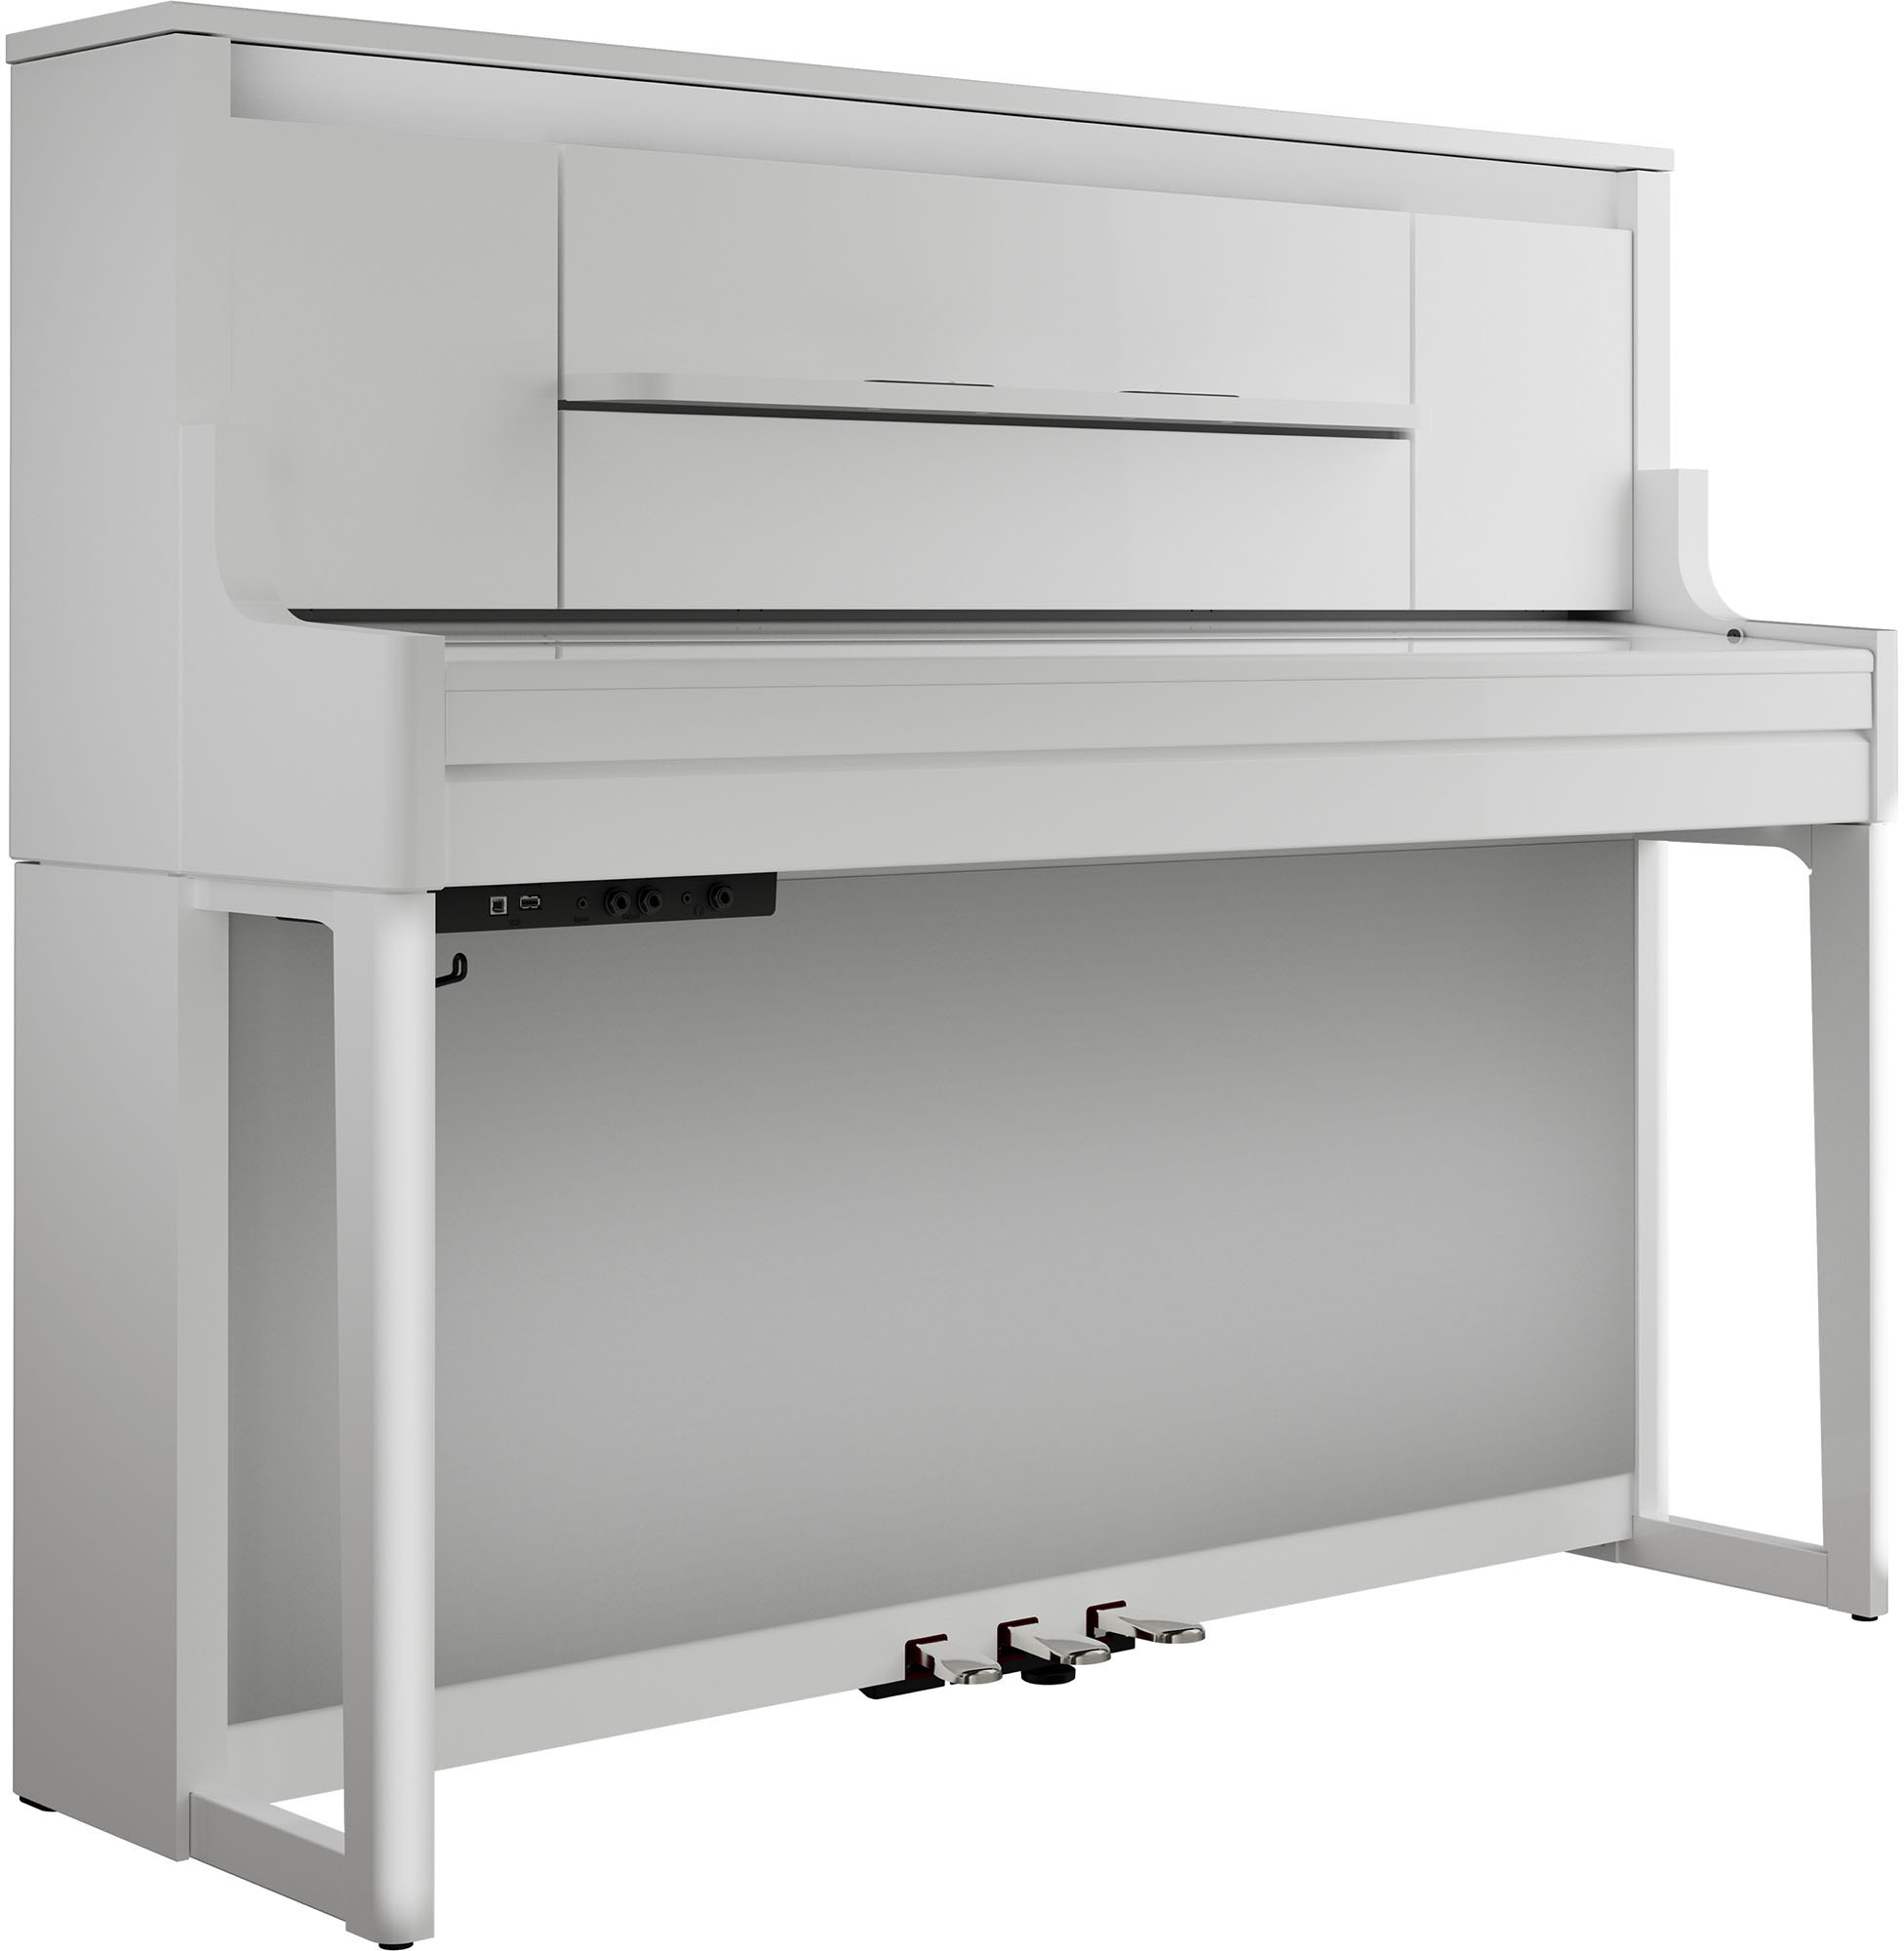 Roland Lx-9-pw - Polished White - Digital piano with stand - Main picture